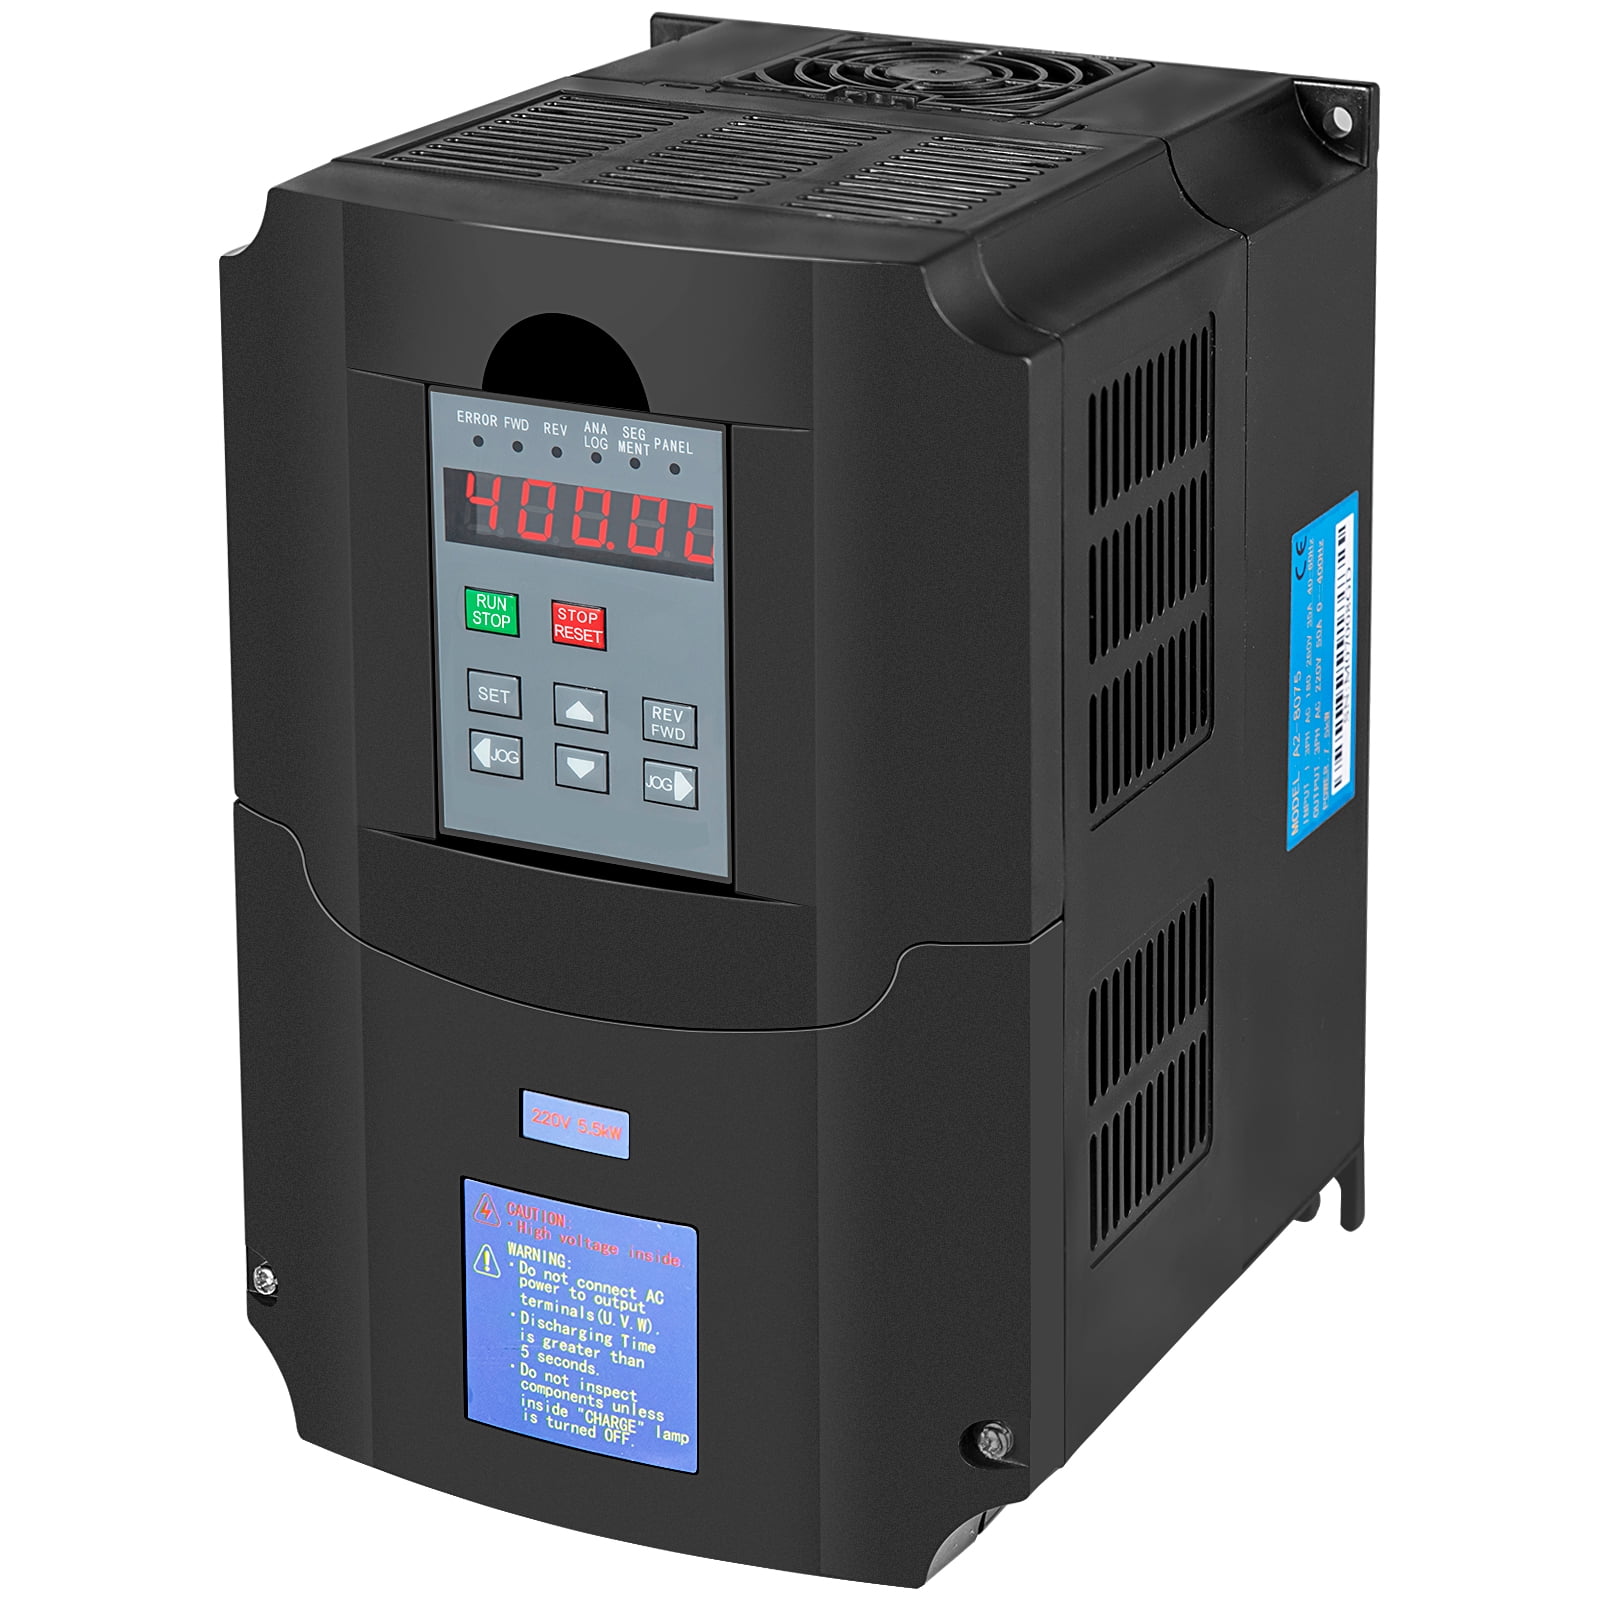 VEVOR Control CNC VFD 220V 5.5 KW 7HP Variable Frequency Drive 36A CNC  Motor Drive Controller Inverter Converter 400 Hz 1 or 3 Phase Input 3 Phase  Output for Spindle Motor Speed Control 